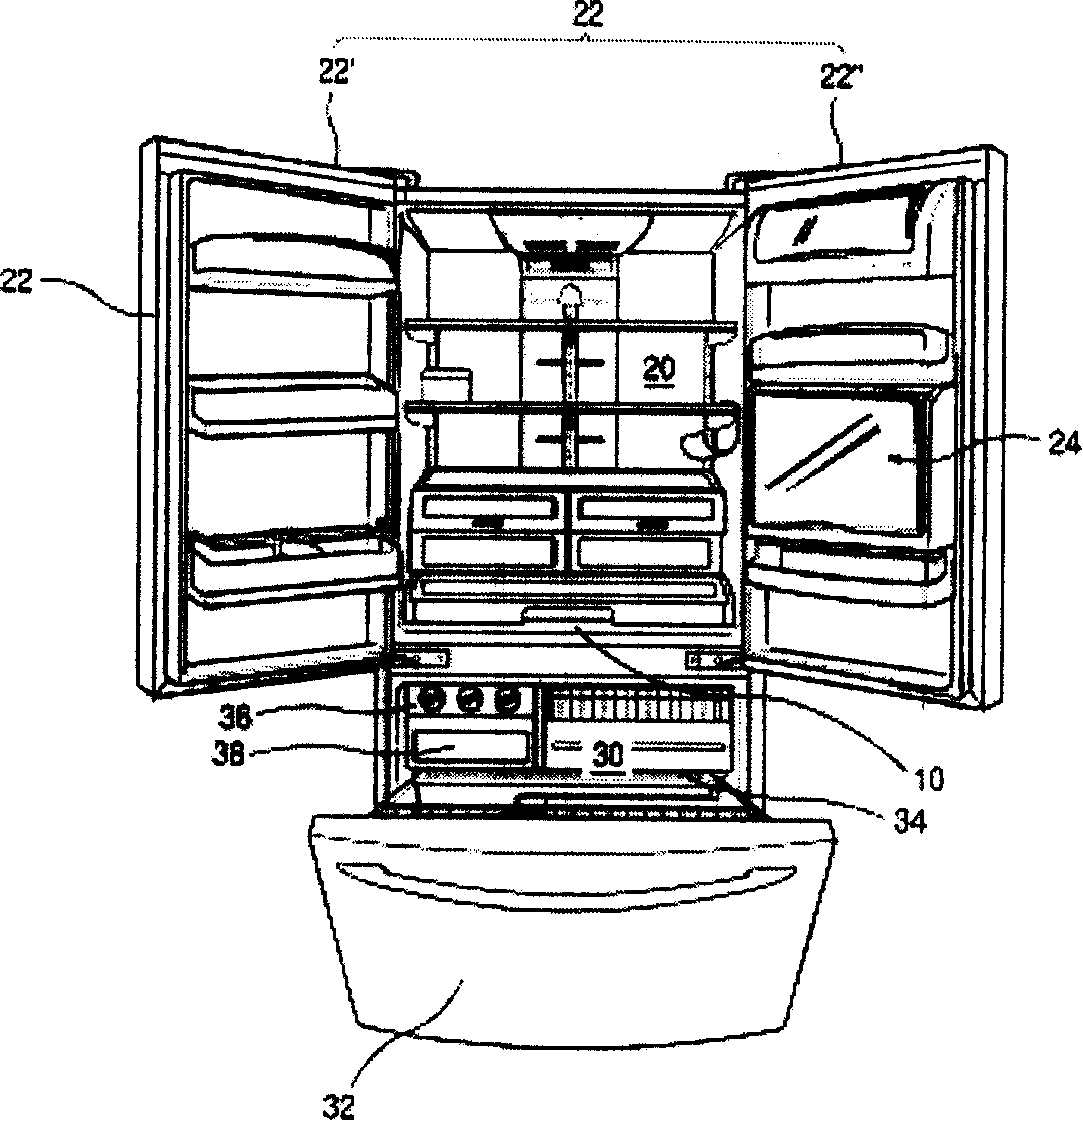 Refrigerating chamber door with ice-making compartment